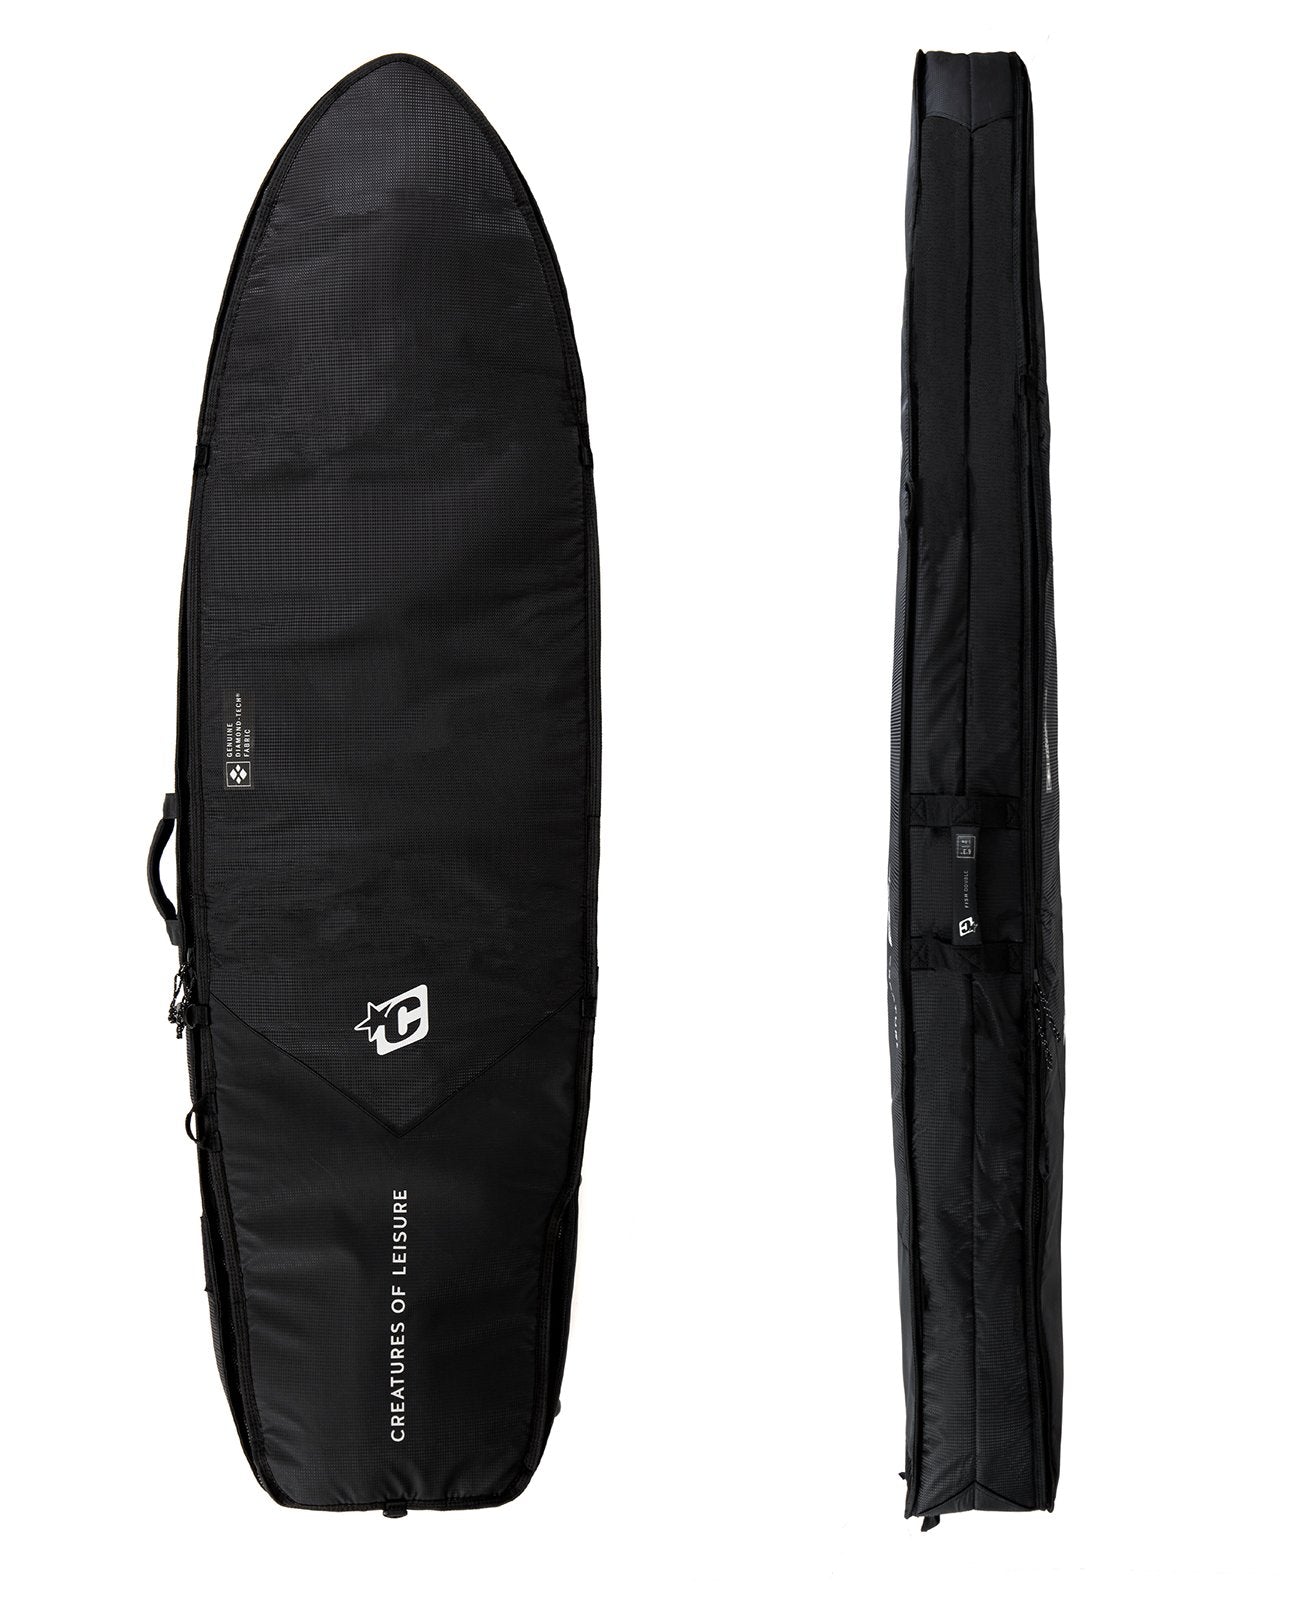 Creatures of Leisure Double DT2.0 Fish Boardbag Black-Silver 6ft3in